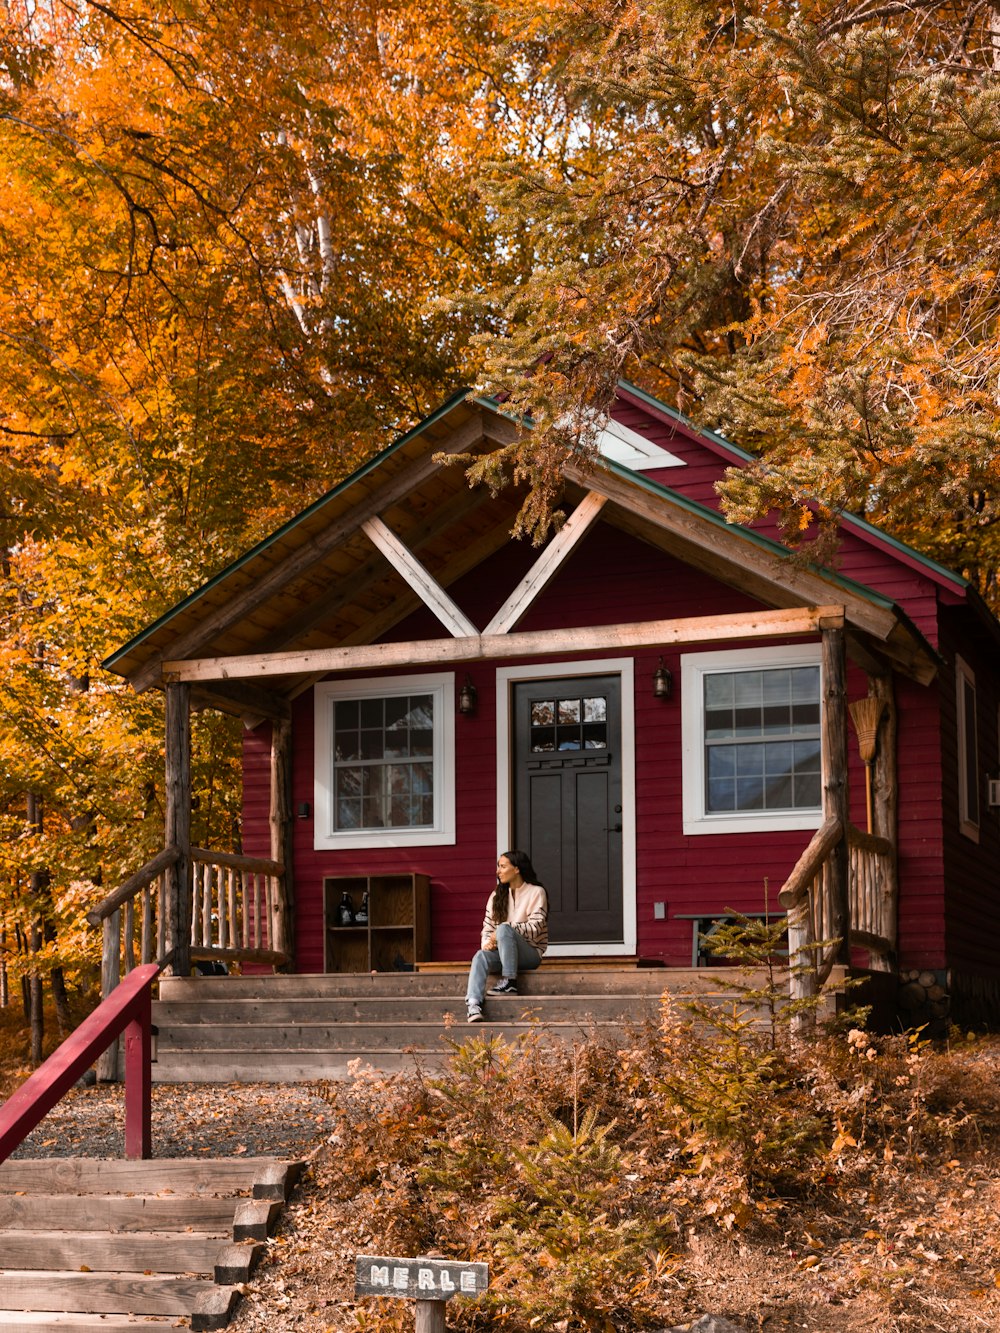 a person sitting on a porch of a red house with yellow leaves